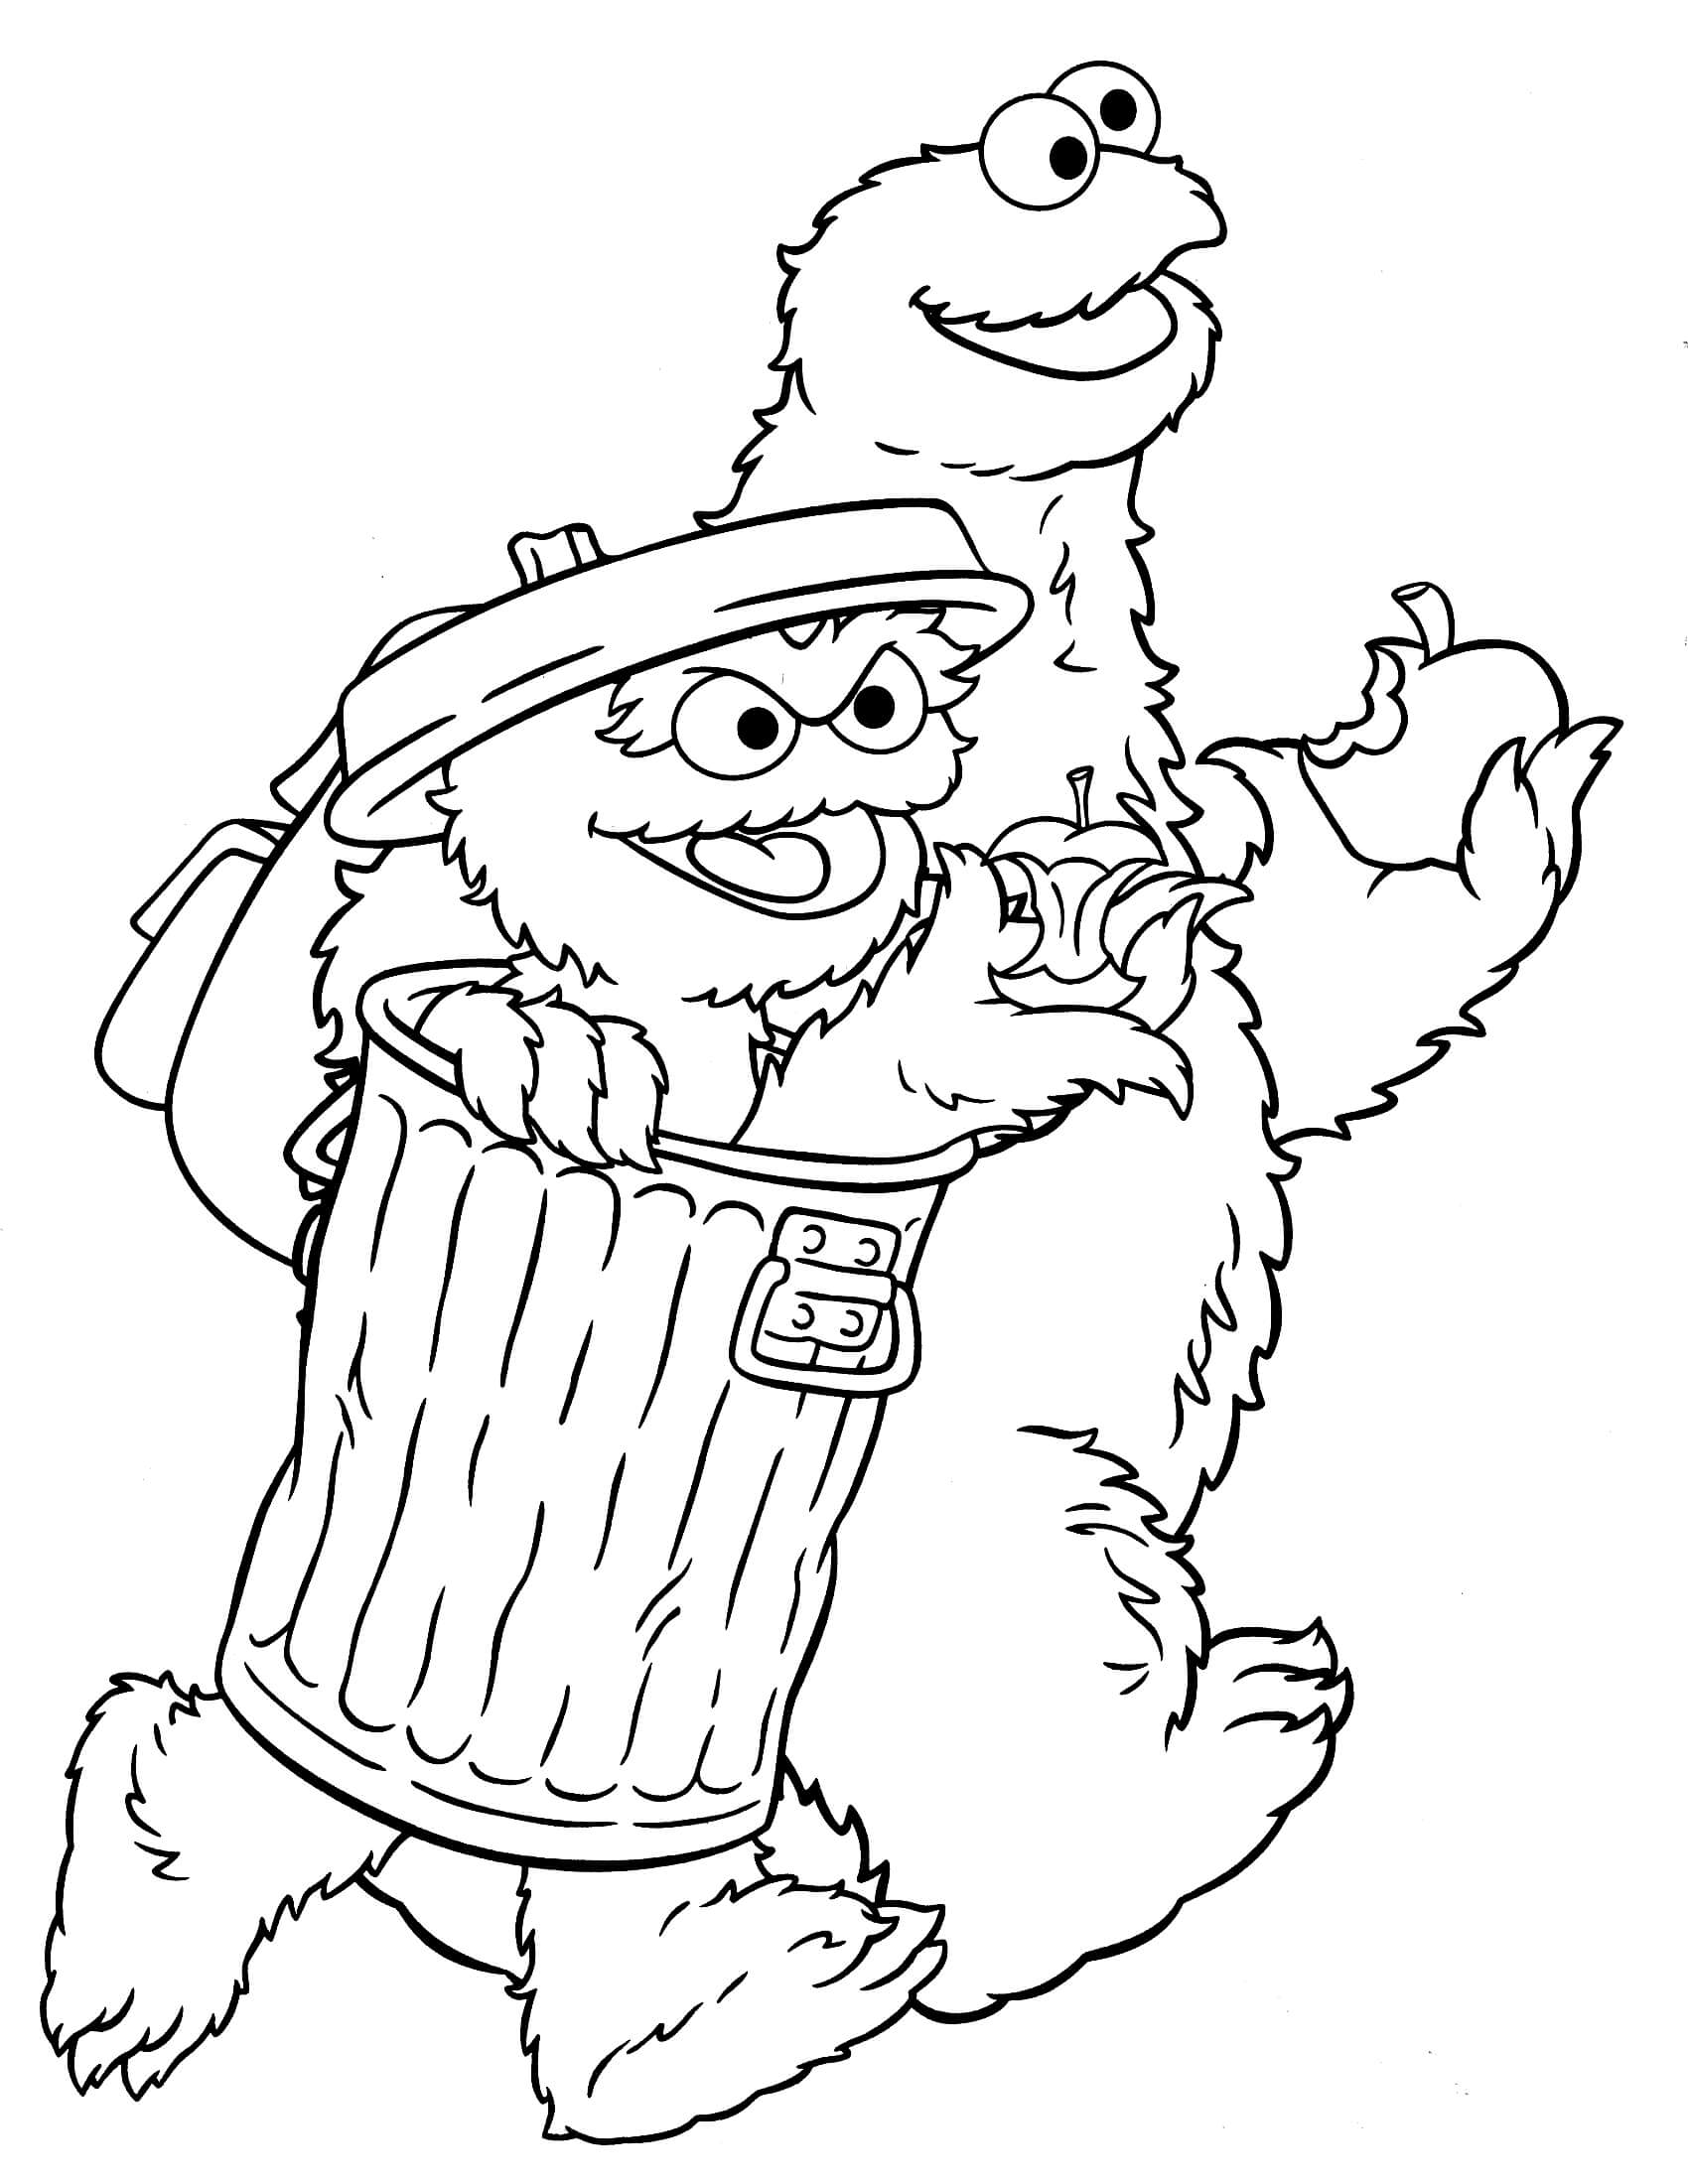 Oscar and Cookie Monster Coloring Page